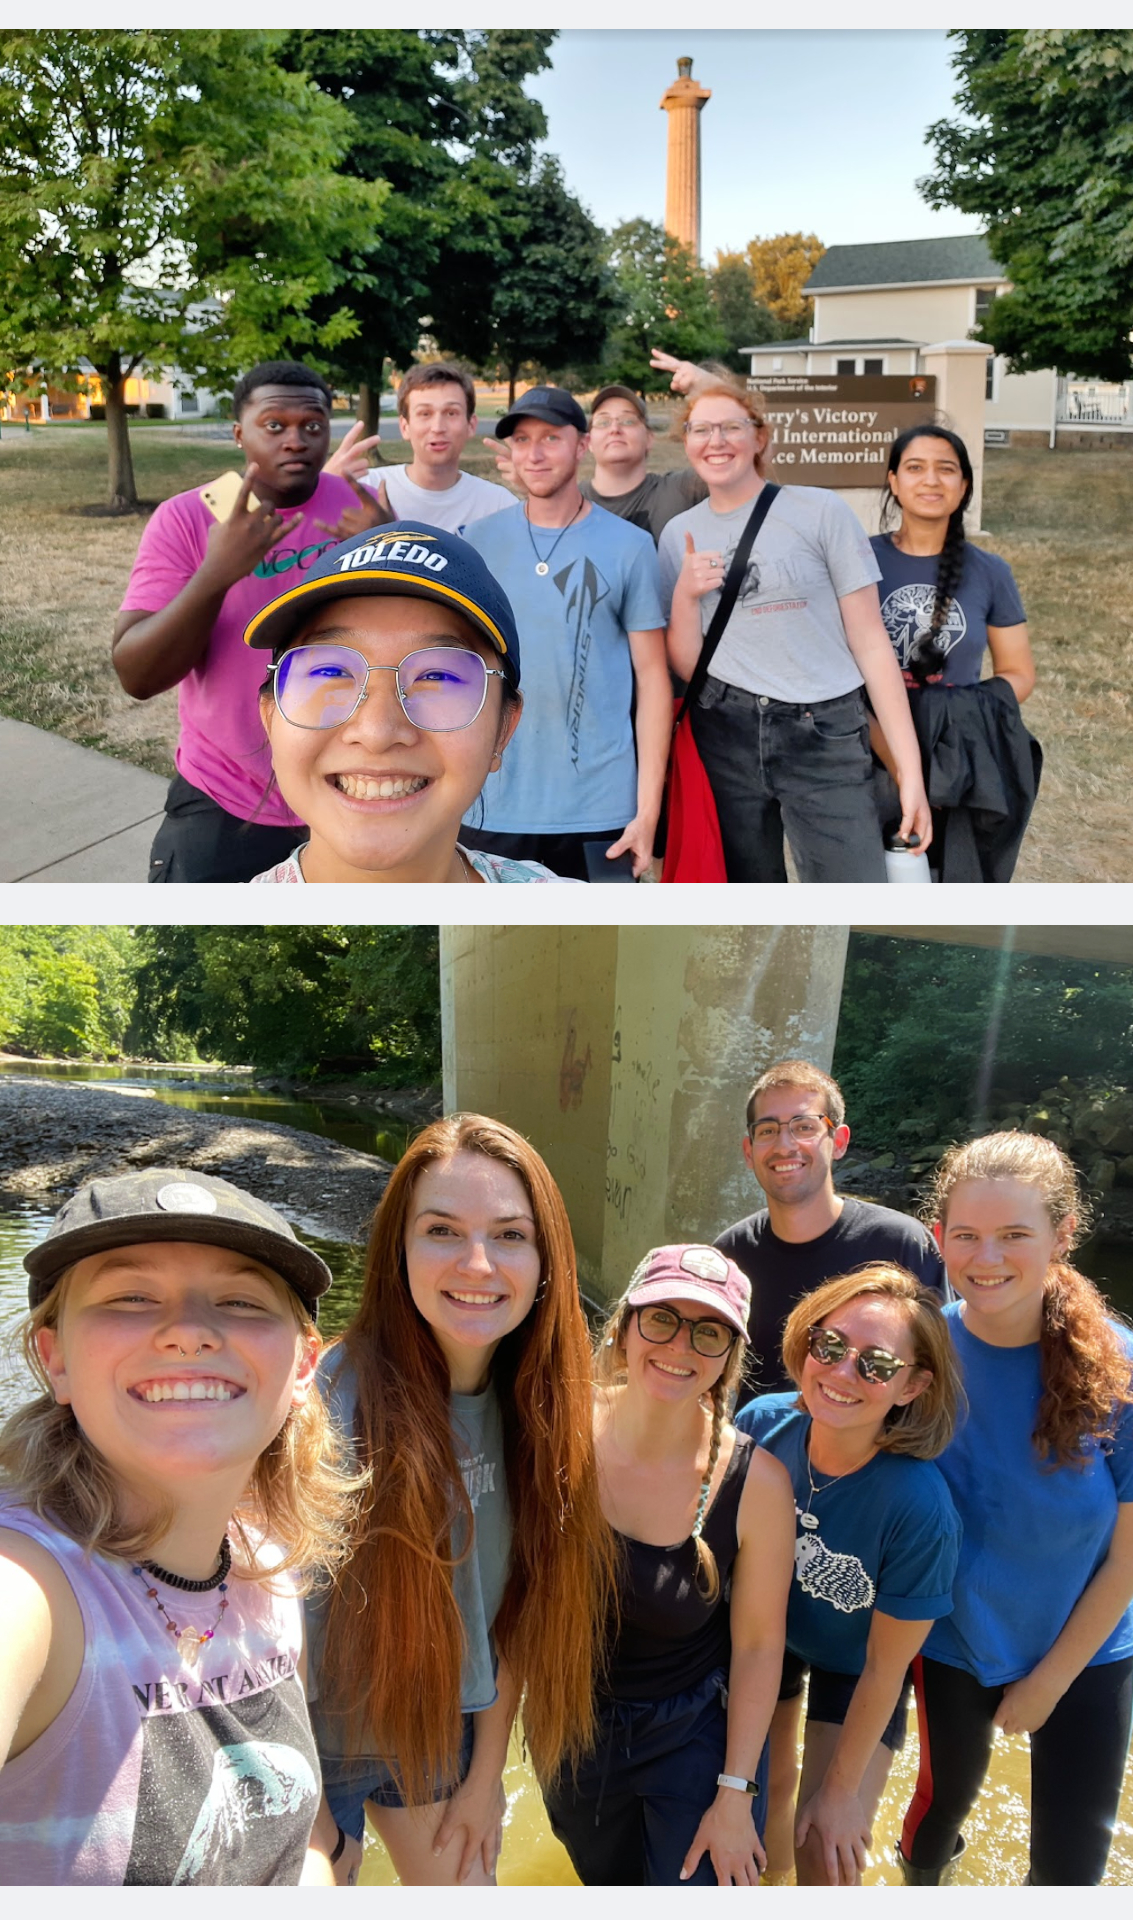 Top: group photo in front of Perry's monument; Bottom: group photo stream sampling in Milan, Ohio